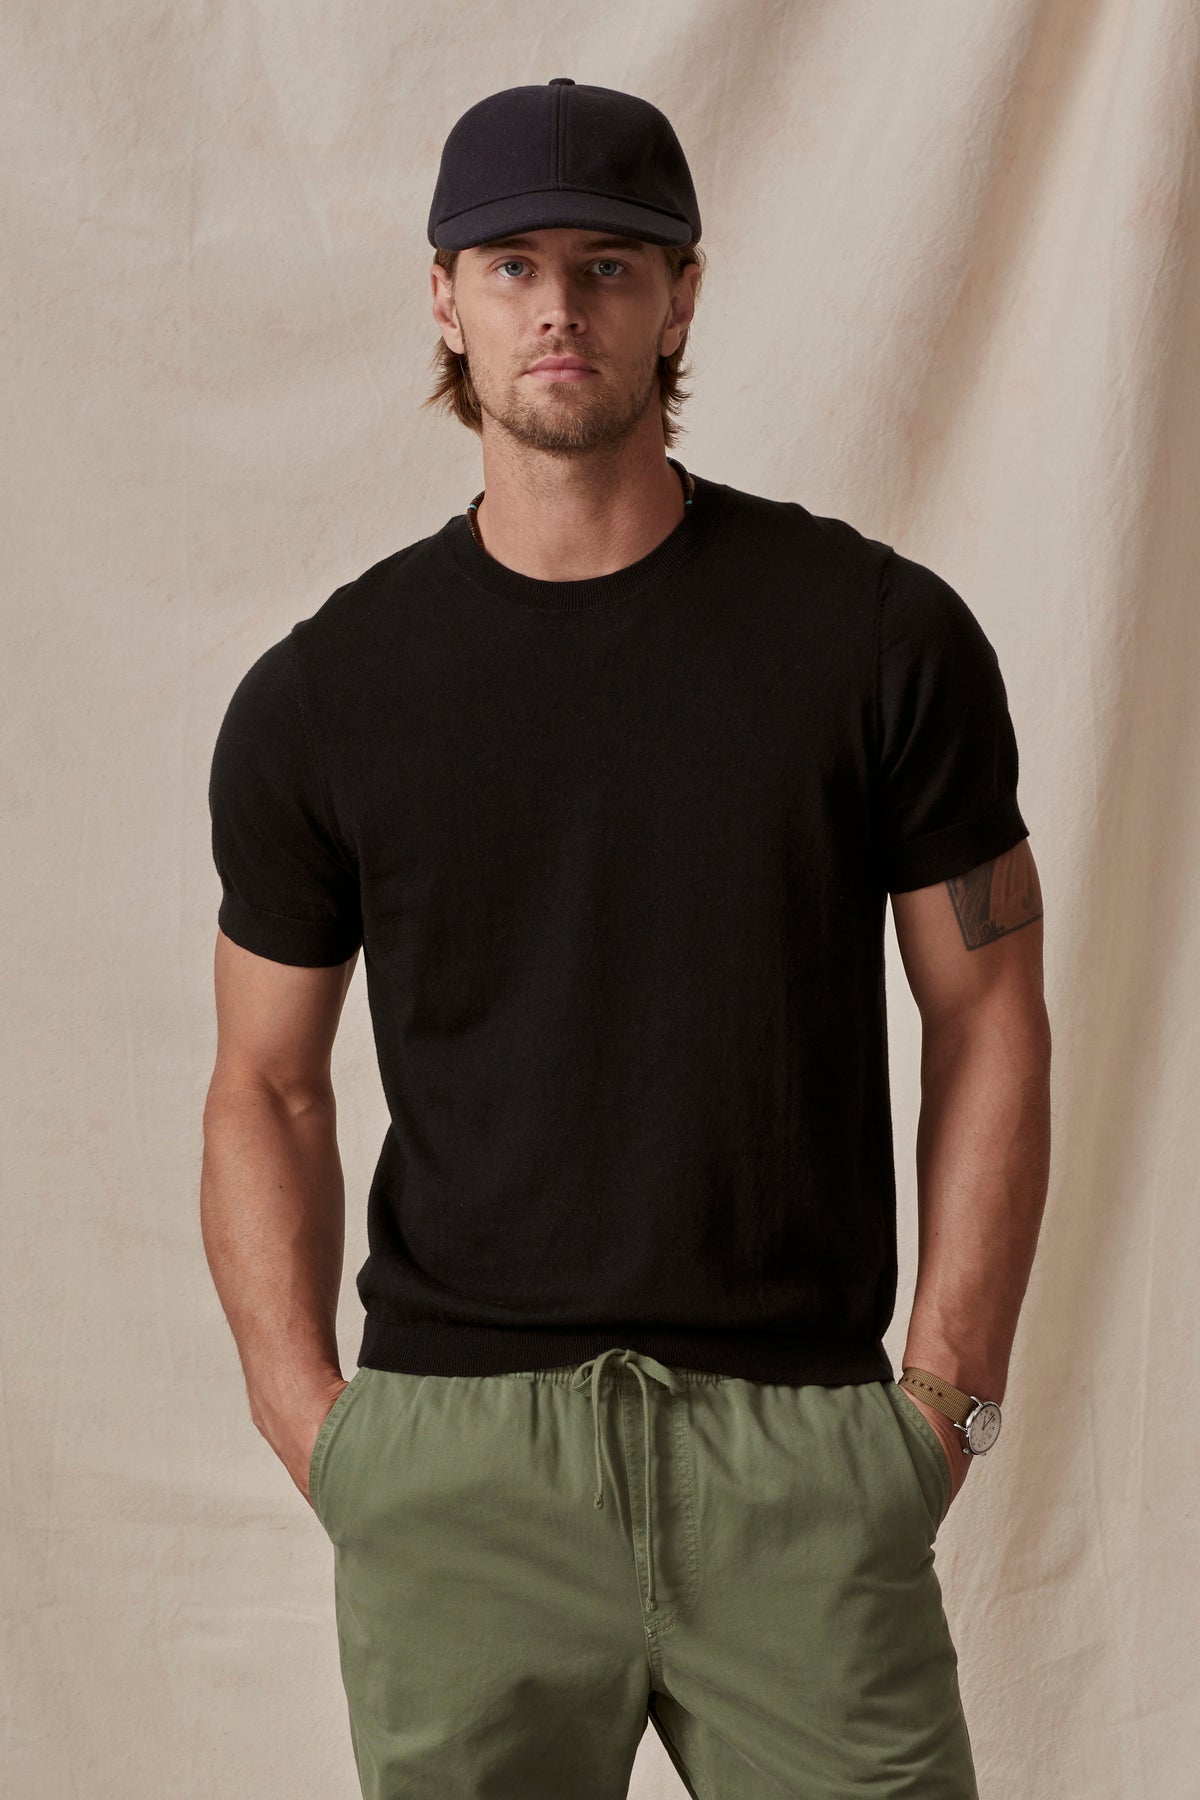 A man wearing a black cotton/linen blend Dexter Crew t-shirt from Velvet by Graham & Spencer and green trousers, accessorized with a cap and a watch, poses against a beige background.-36753529307329